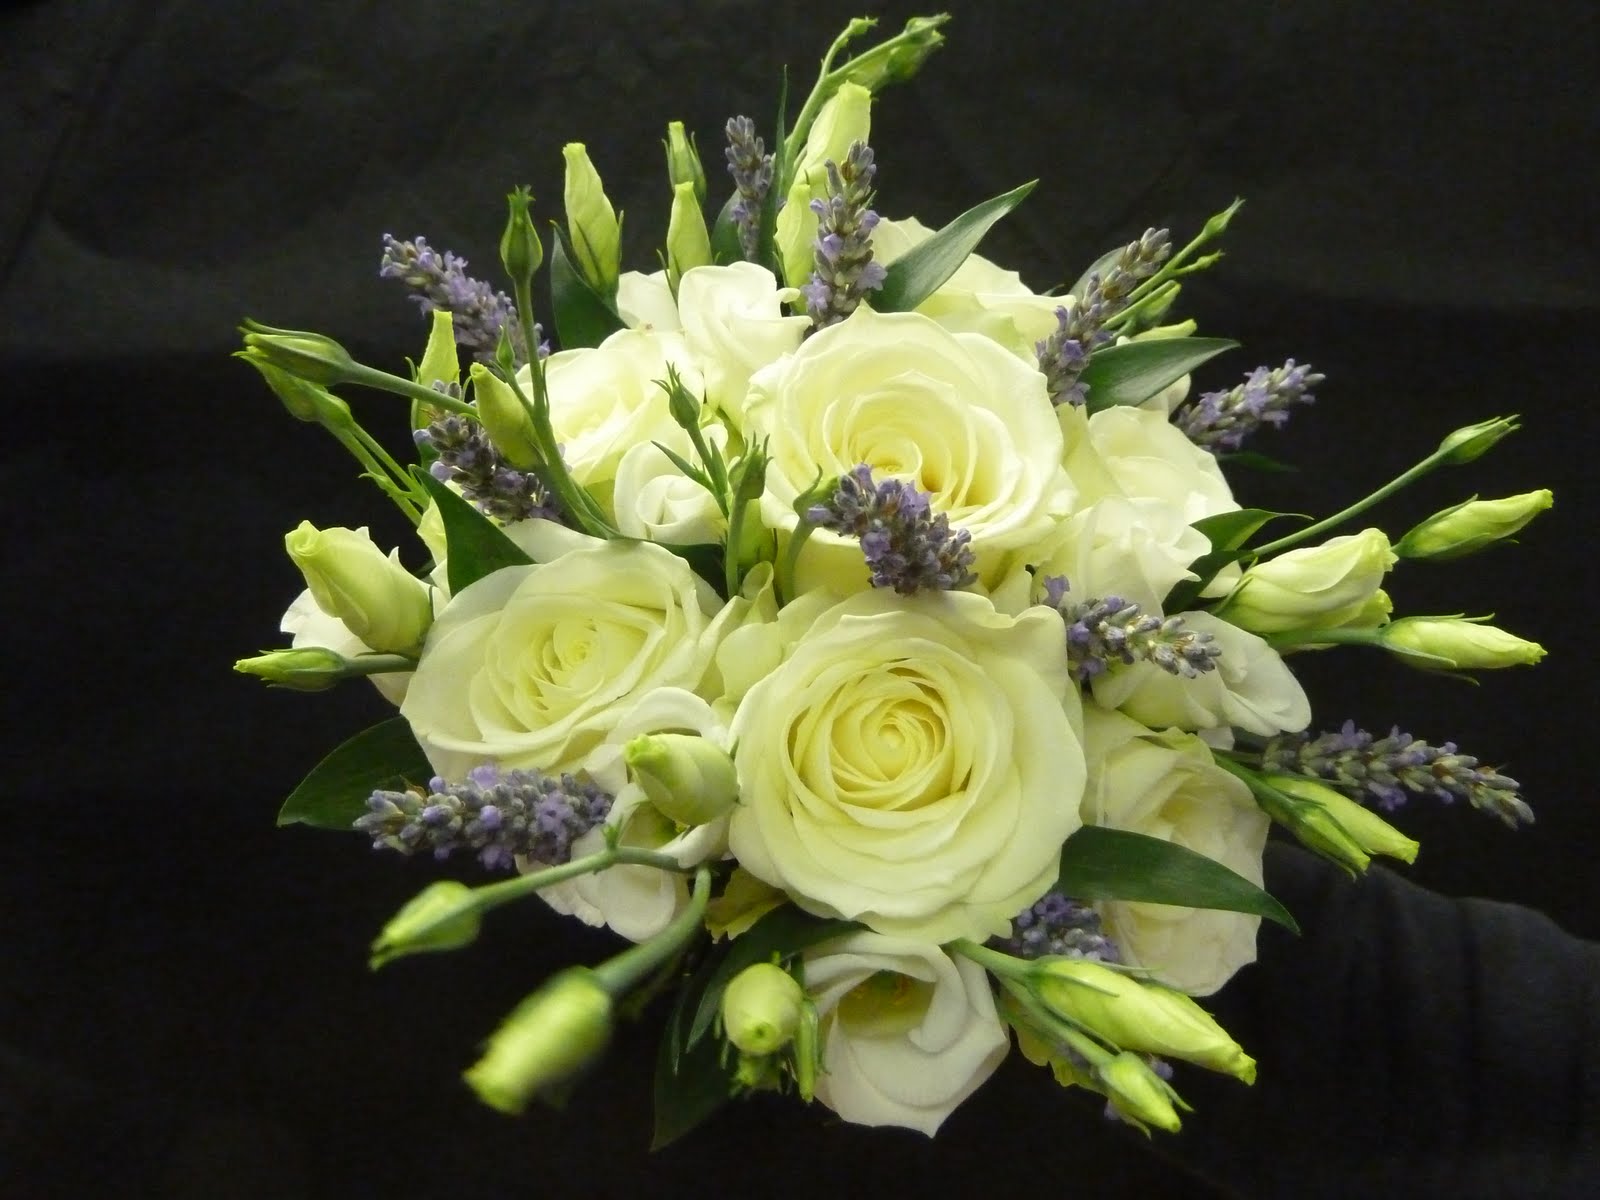 types of flowers roses Small White Flowers and Lavender Roses | 1600 x 1200